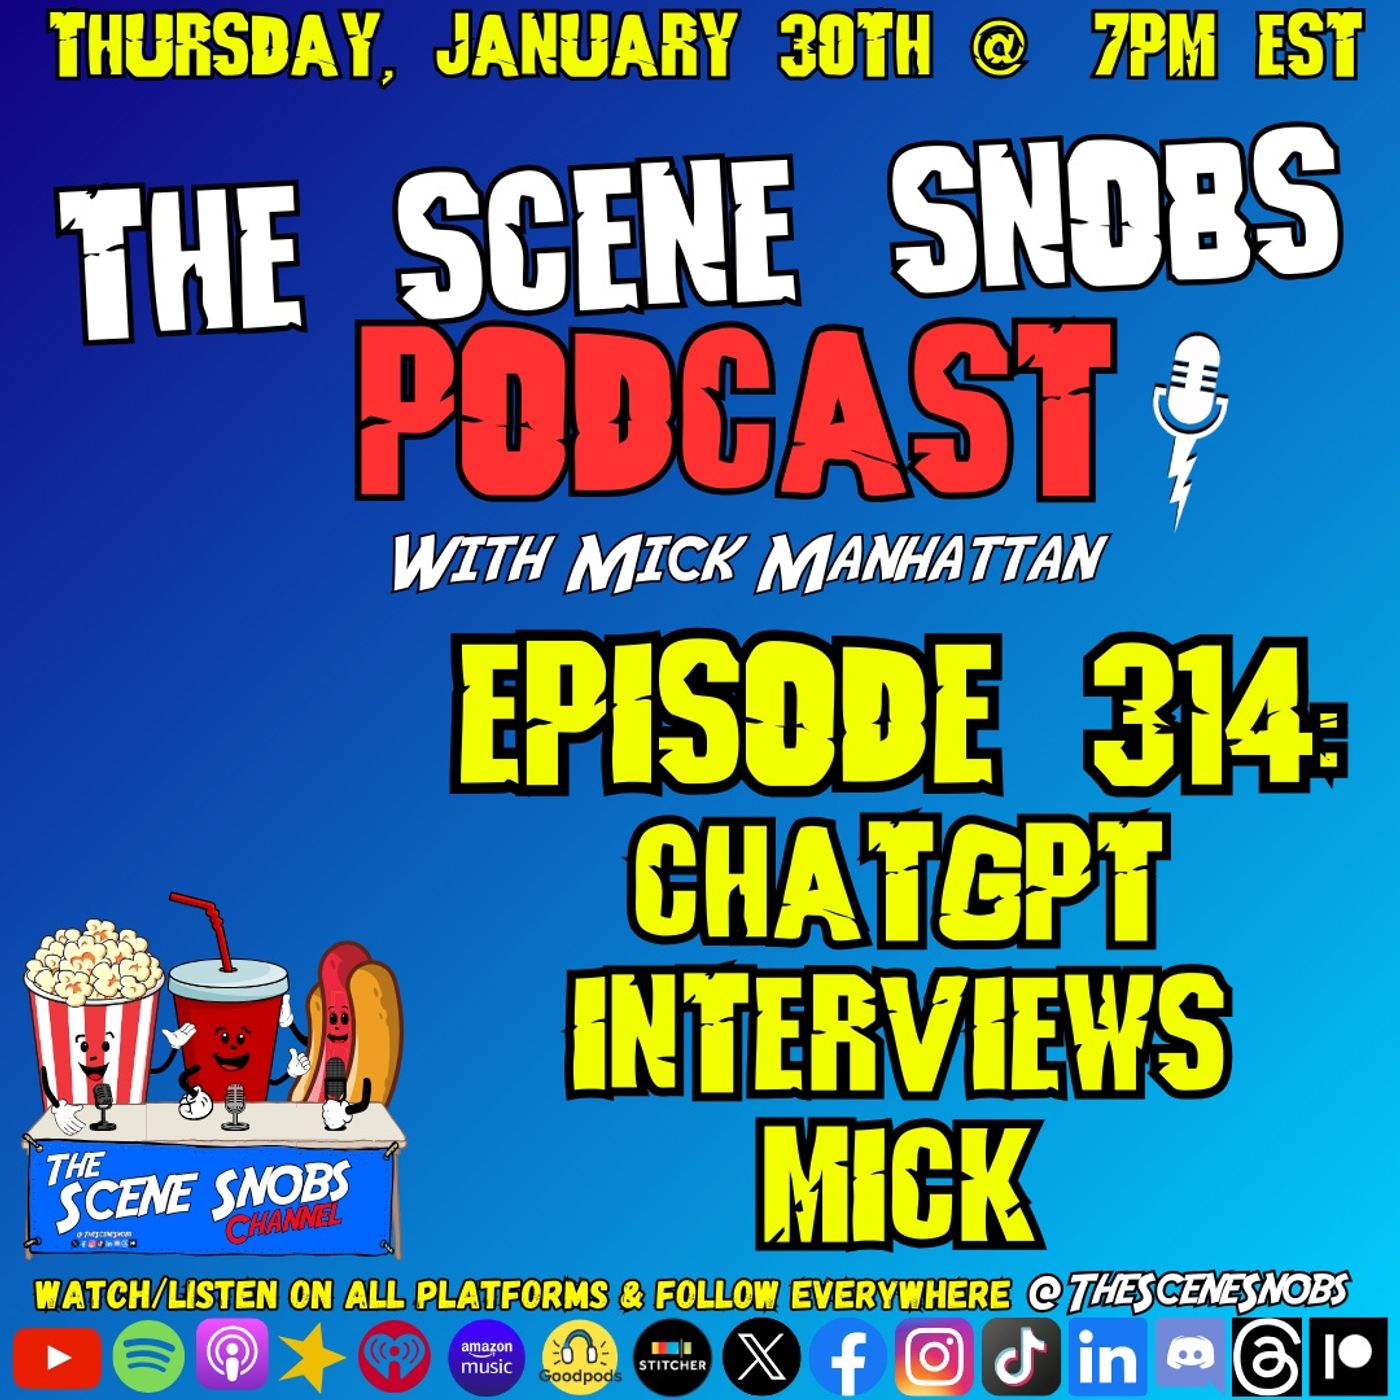 The Scene Snobs Podcast – ChatGPT Interviews Mick